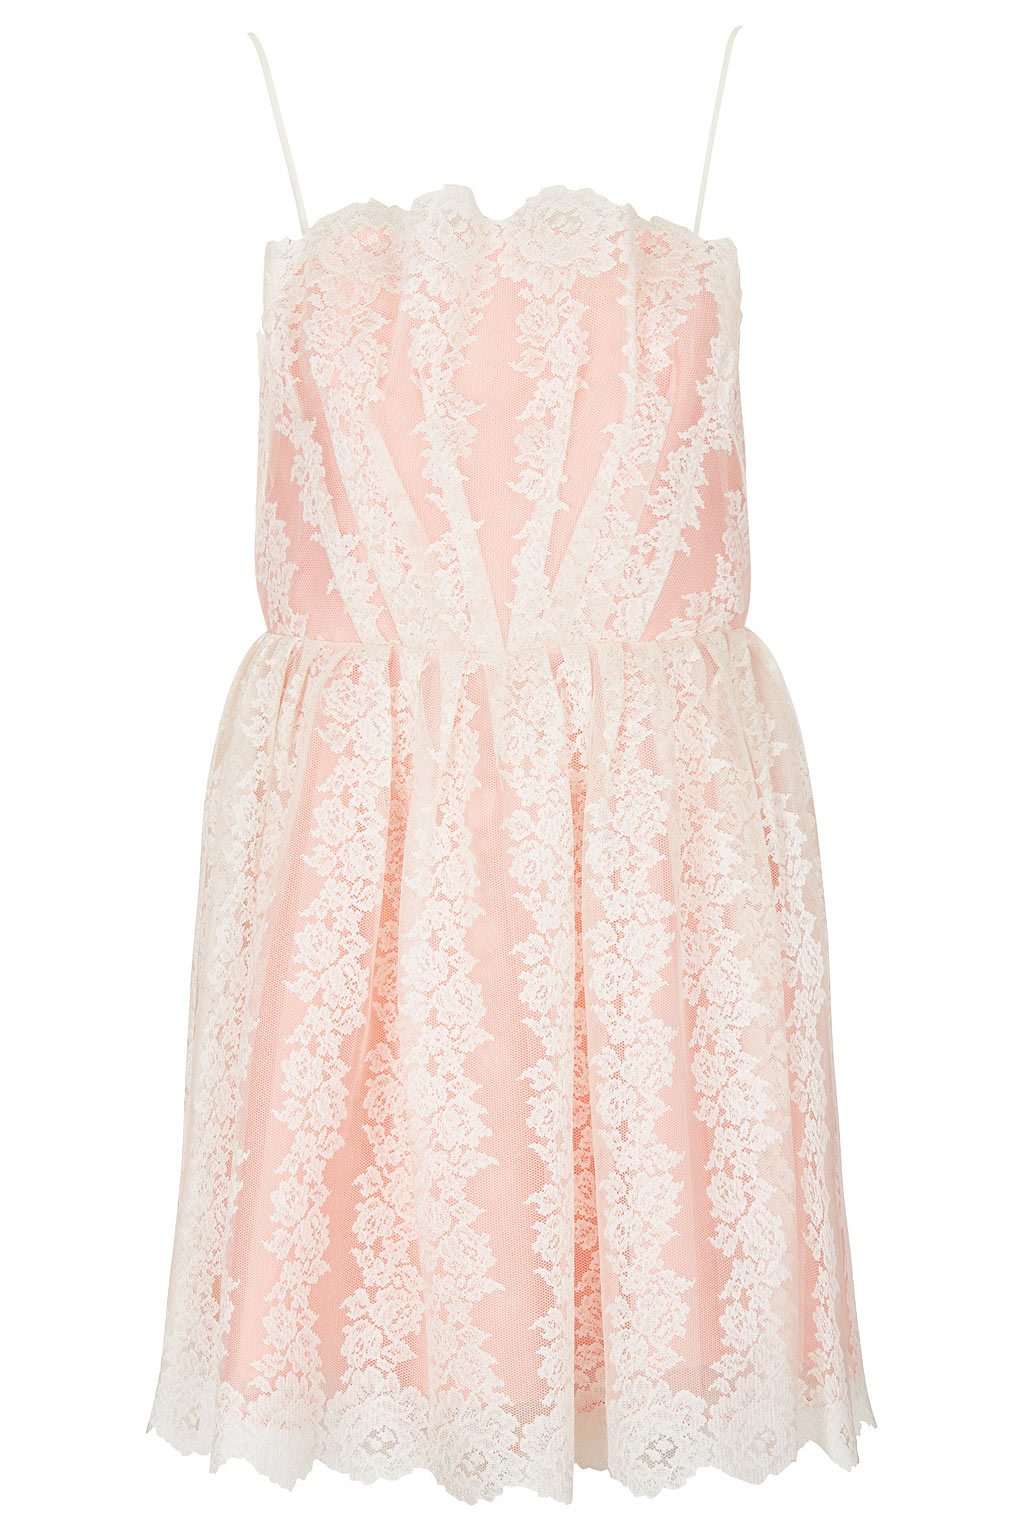 Topshop Strappy Lace Prom Dress in Pink | Lyst